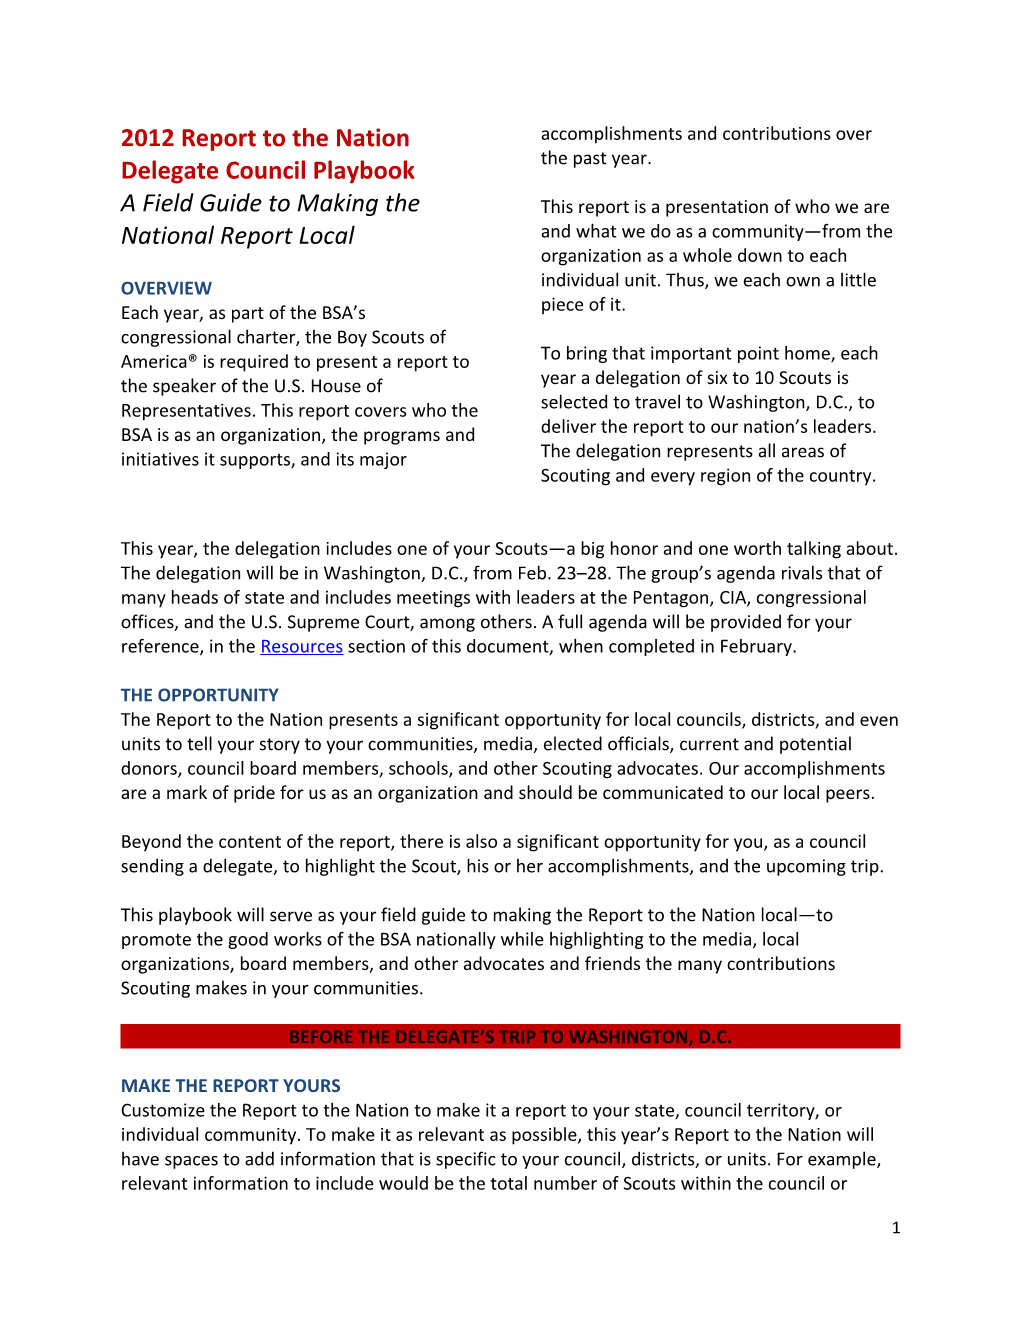 2012 Report to the Nation Delegate Council Playbook